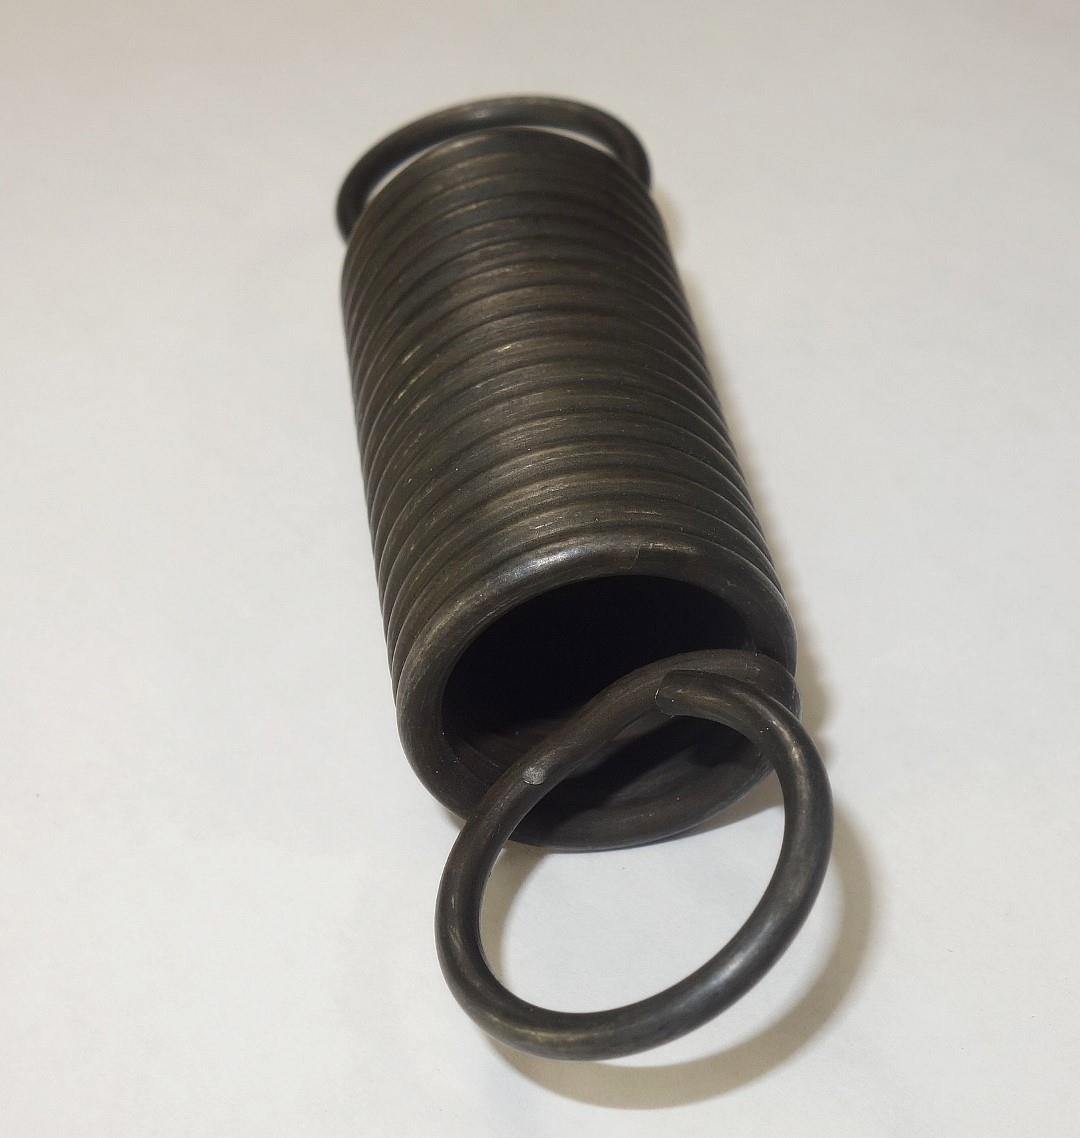 HM-881 | 5360-01-255-2808 Helical Spring Extension (2).JPG